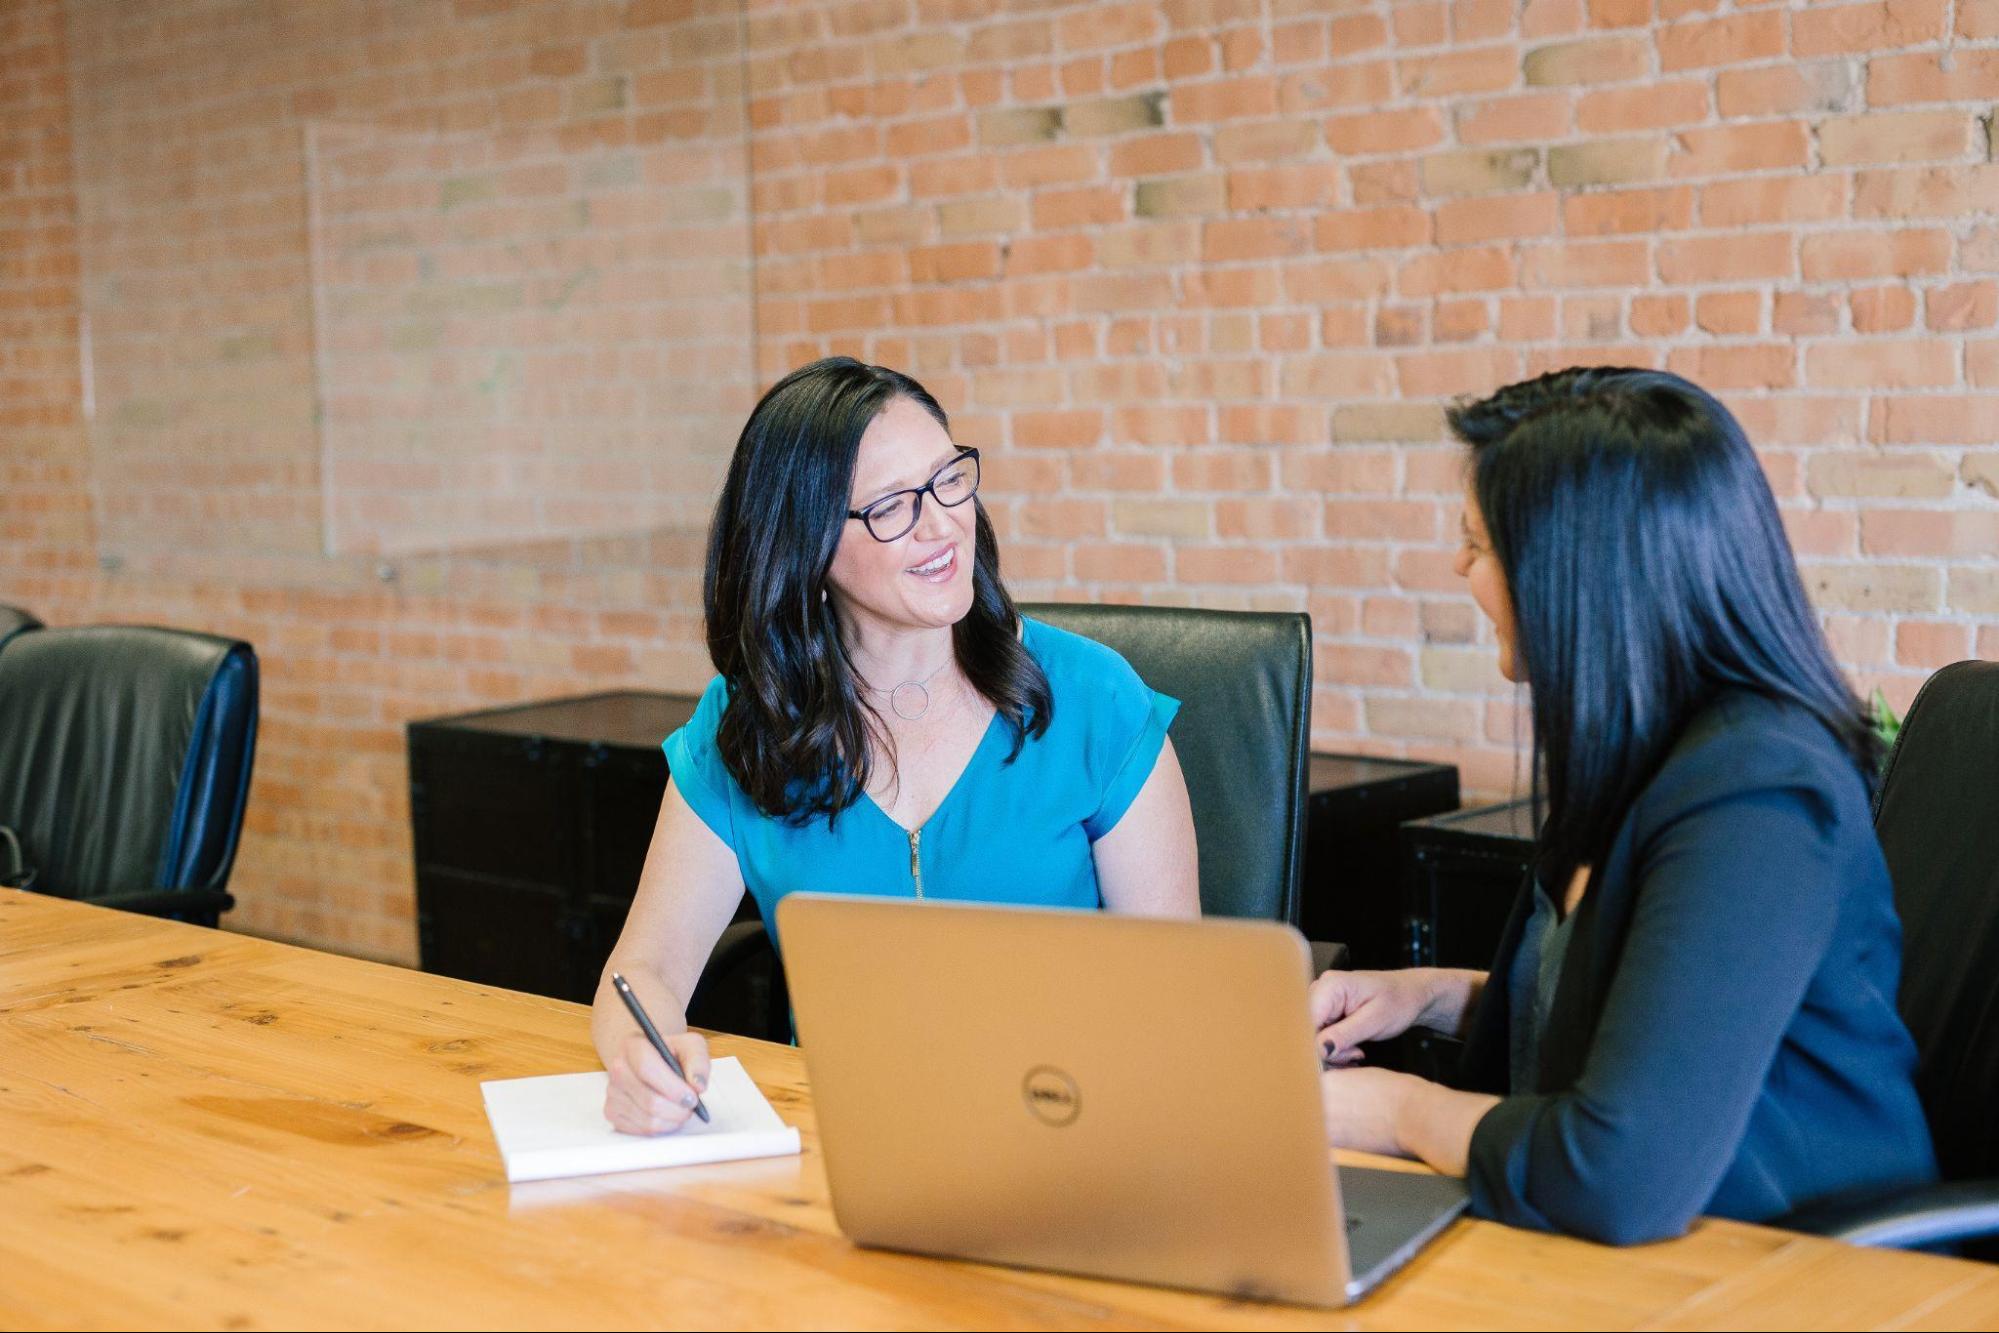 Two women are sitting at a wooden table in a meeting room with a brick wall background. One woman, likely discussing blockchain technology, is holding a pen and notepad, smiling, and facing a laptop. The other woman is engaging with her, also smiling. Both are wearing business attire.